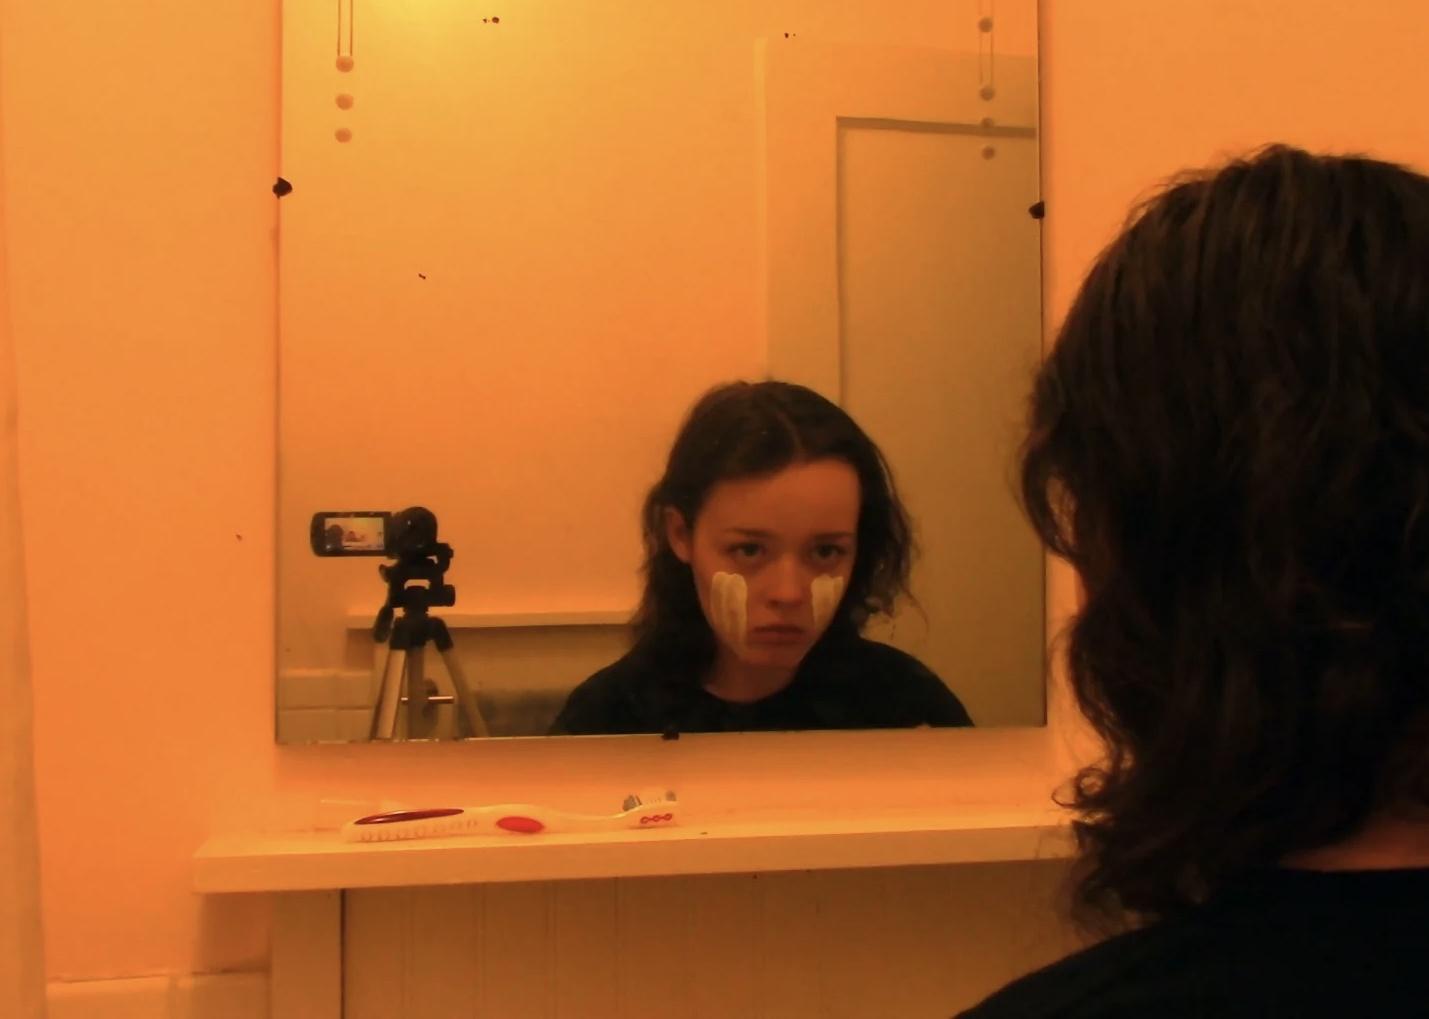 A young girl next to a tripod in her bathroom looking in the mirror with white paint down her cheeks